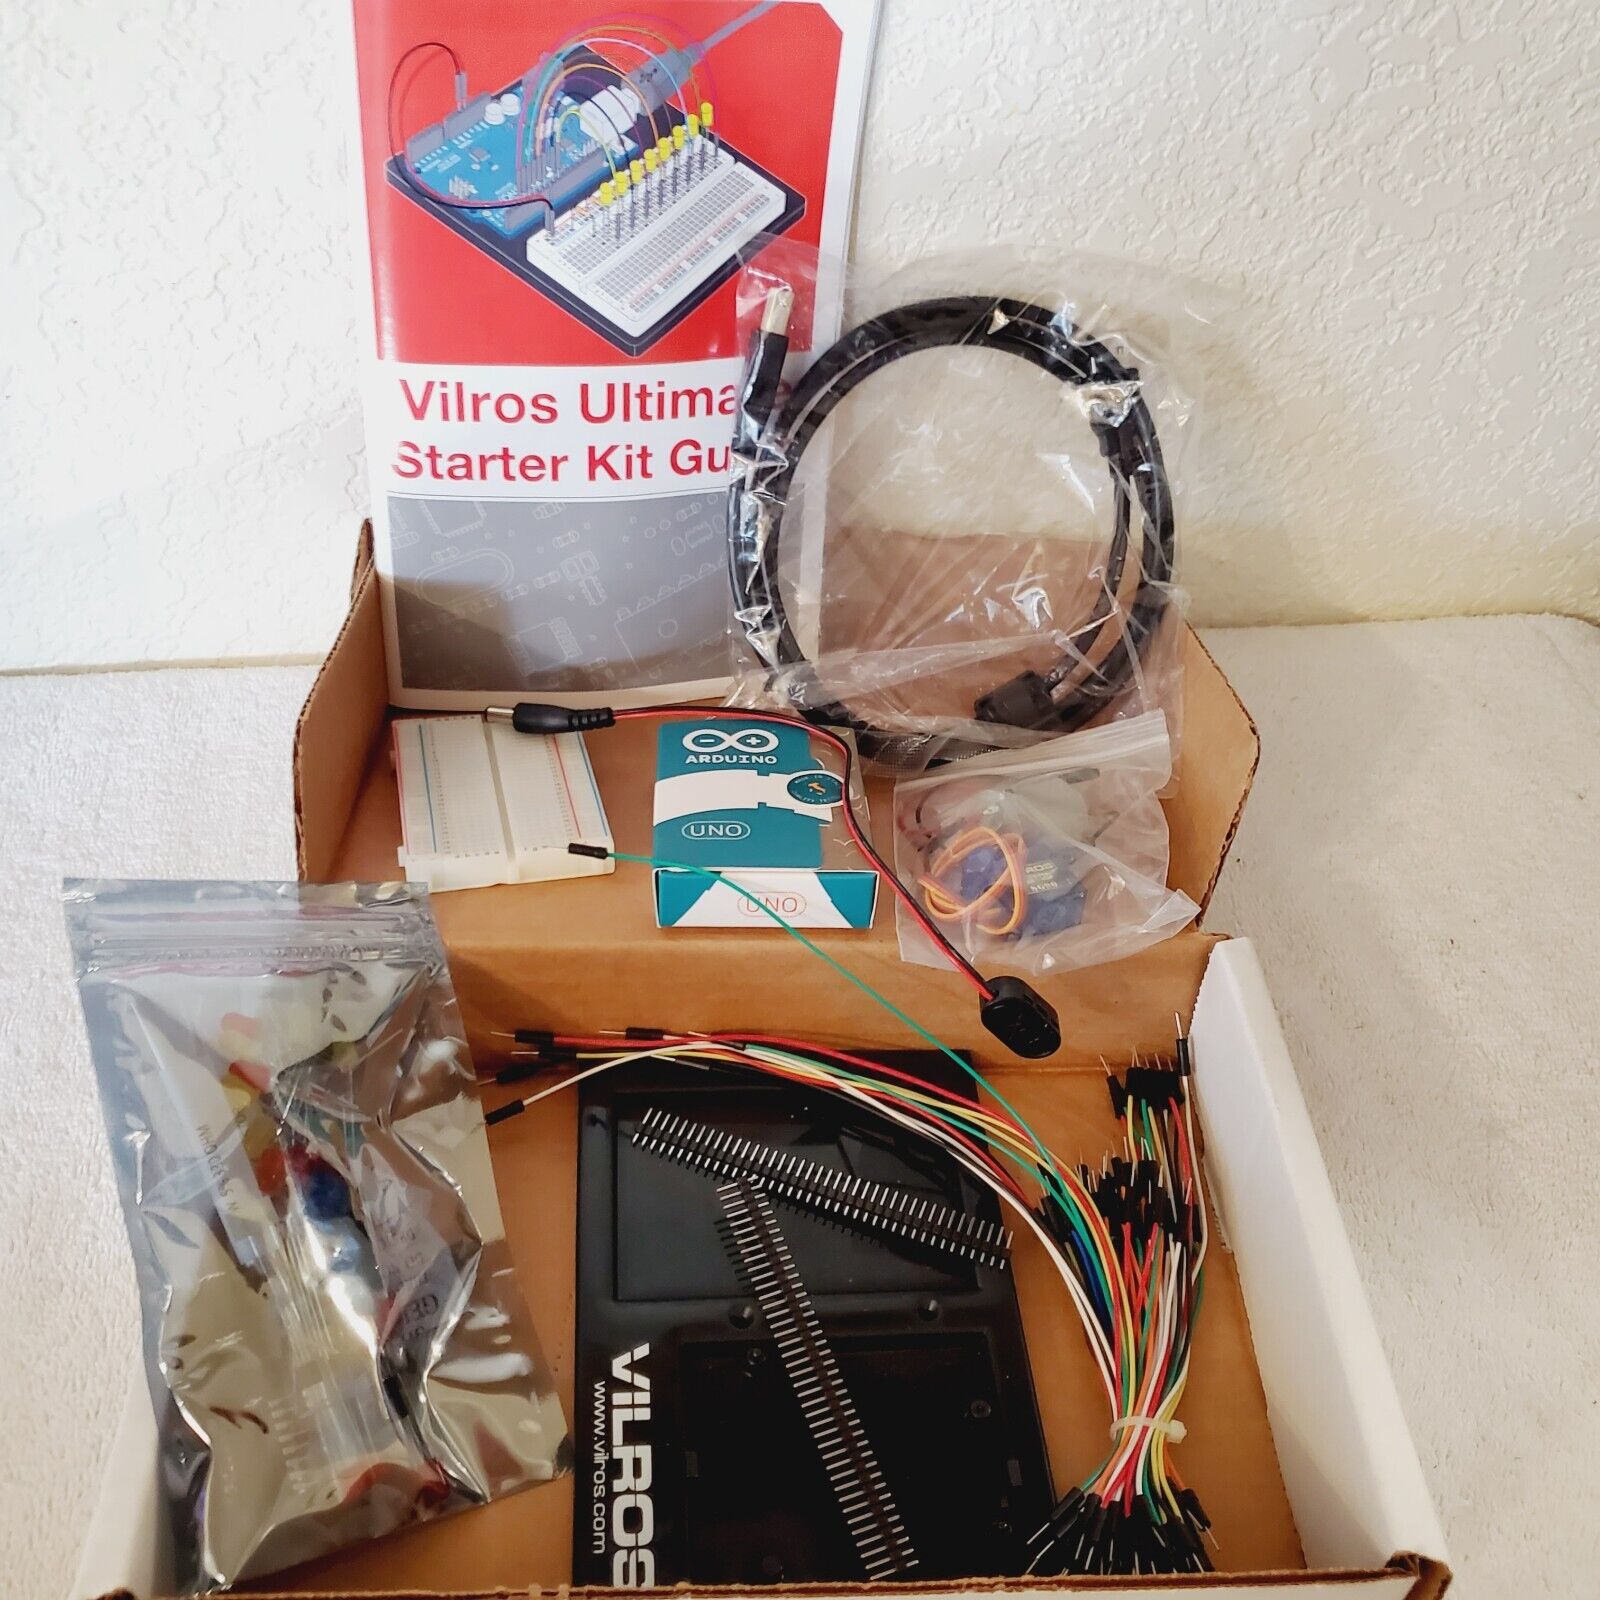 Vilros Arduino Uno 3 Ultimate Starter Kit Includes 12 Circuit Guide Programming